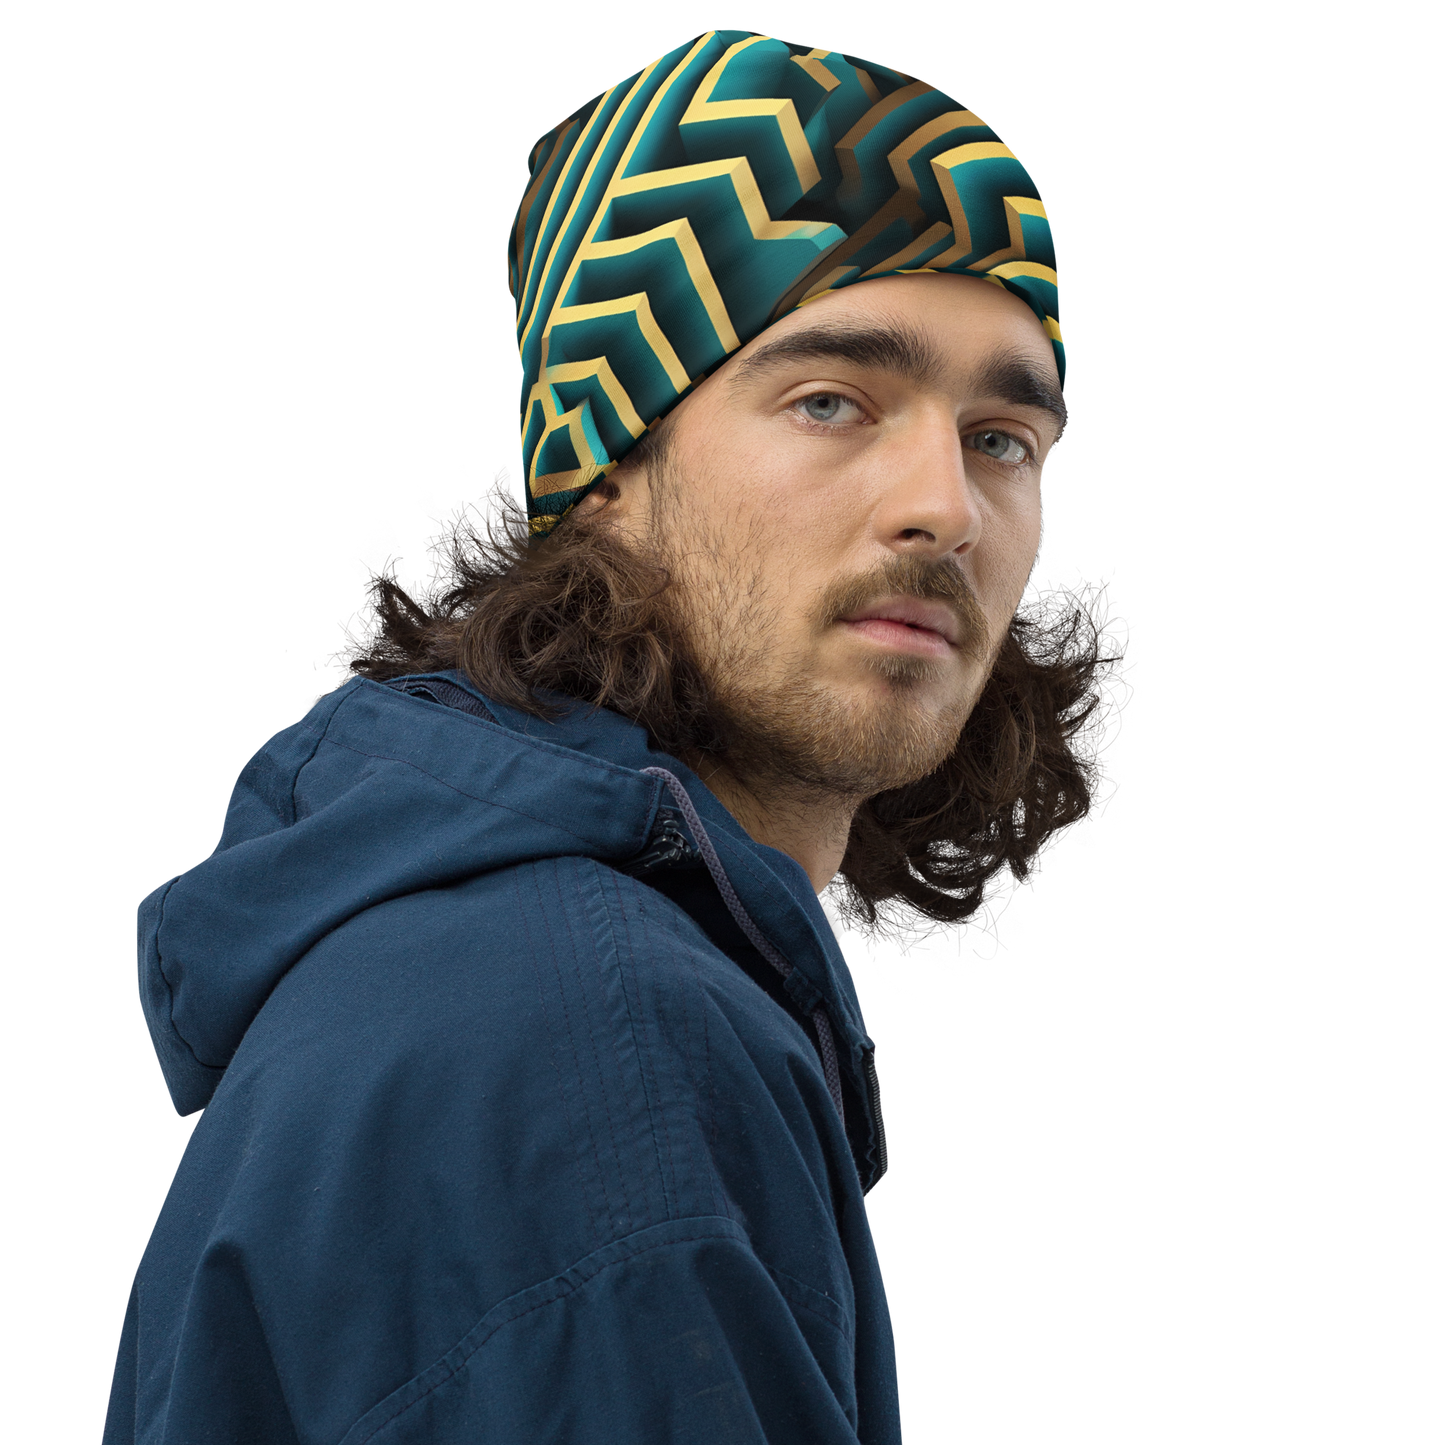 3D Maze Illusion | 3D Patterns | All-Over Print Beanie - #5